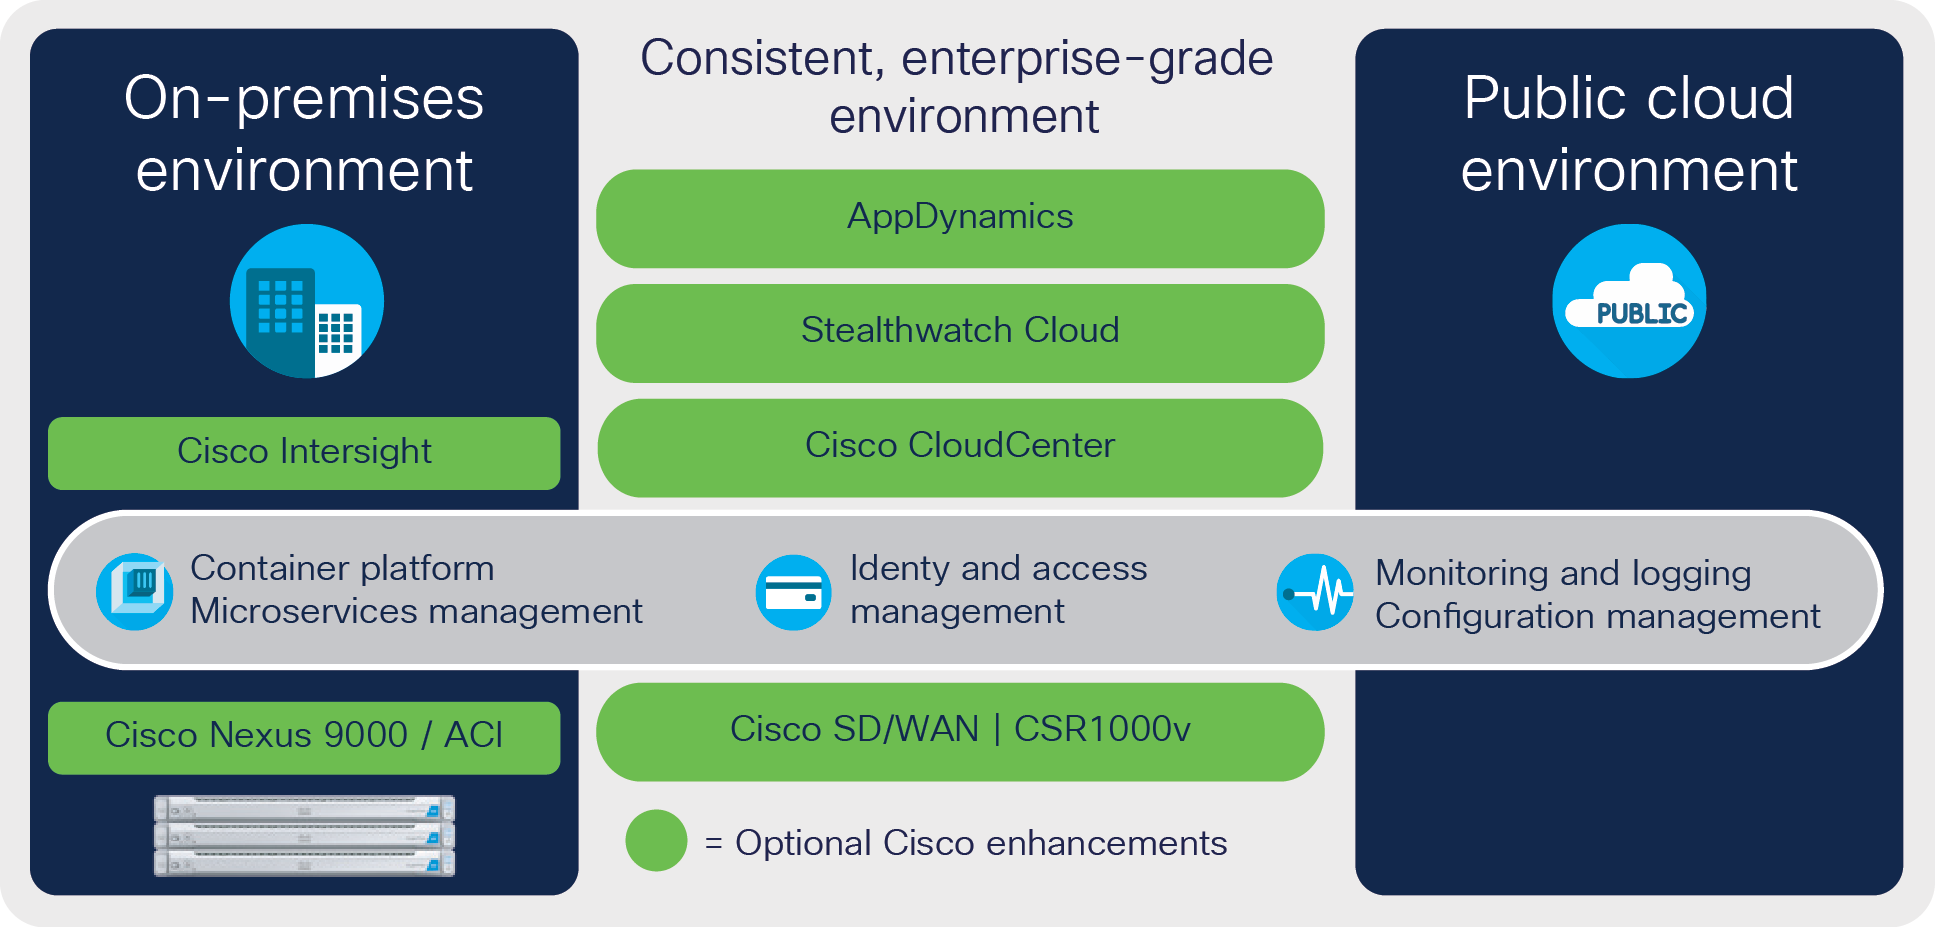 All of our simplified solutions can be enhanced with additional tools from Cisco